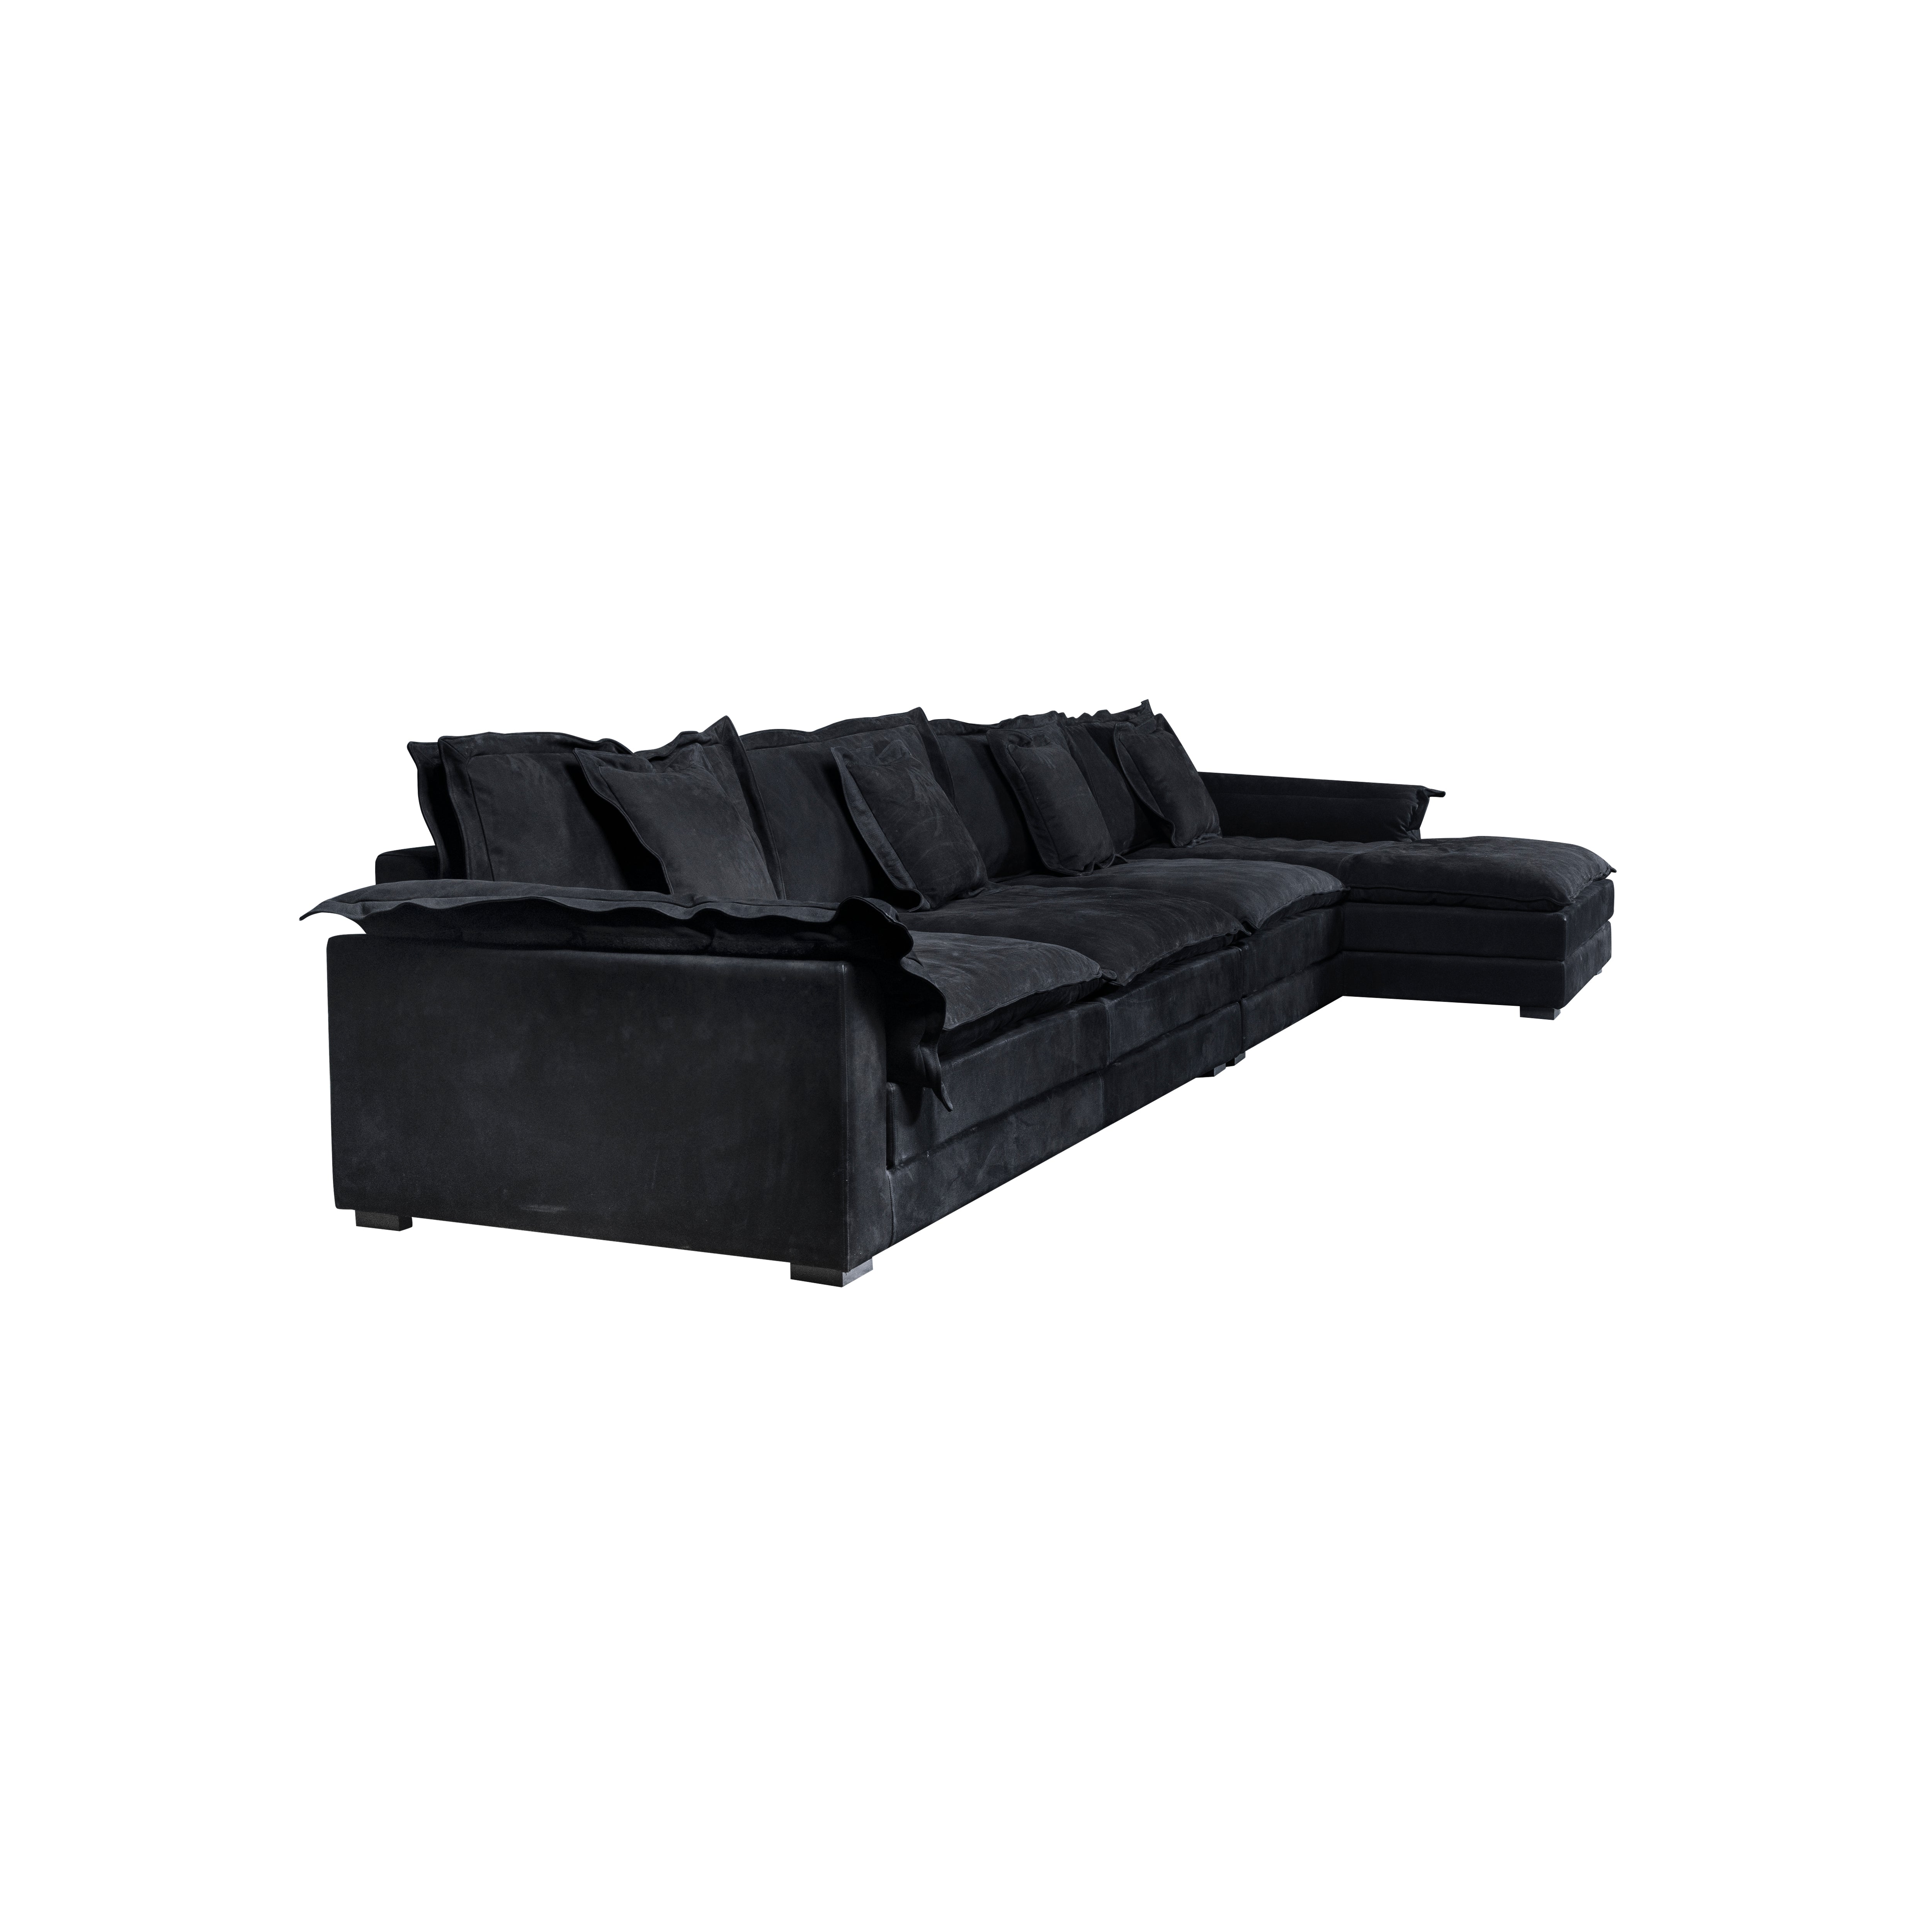 King Nubuck Leather Sectional Sofa Ink Side